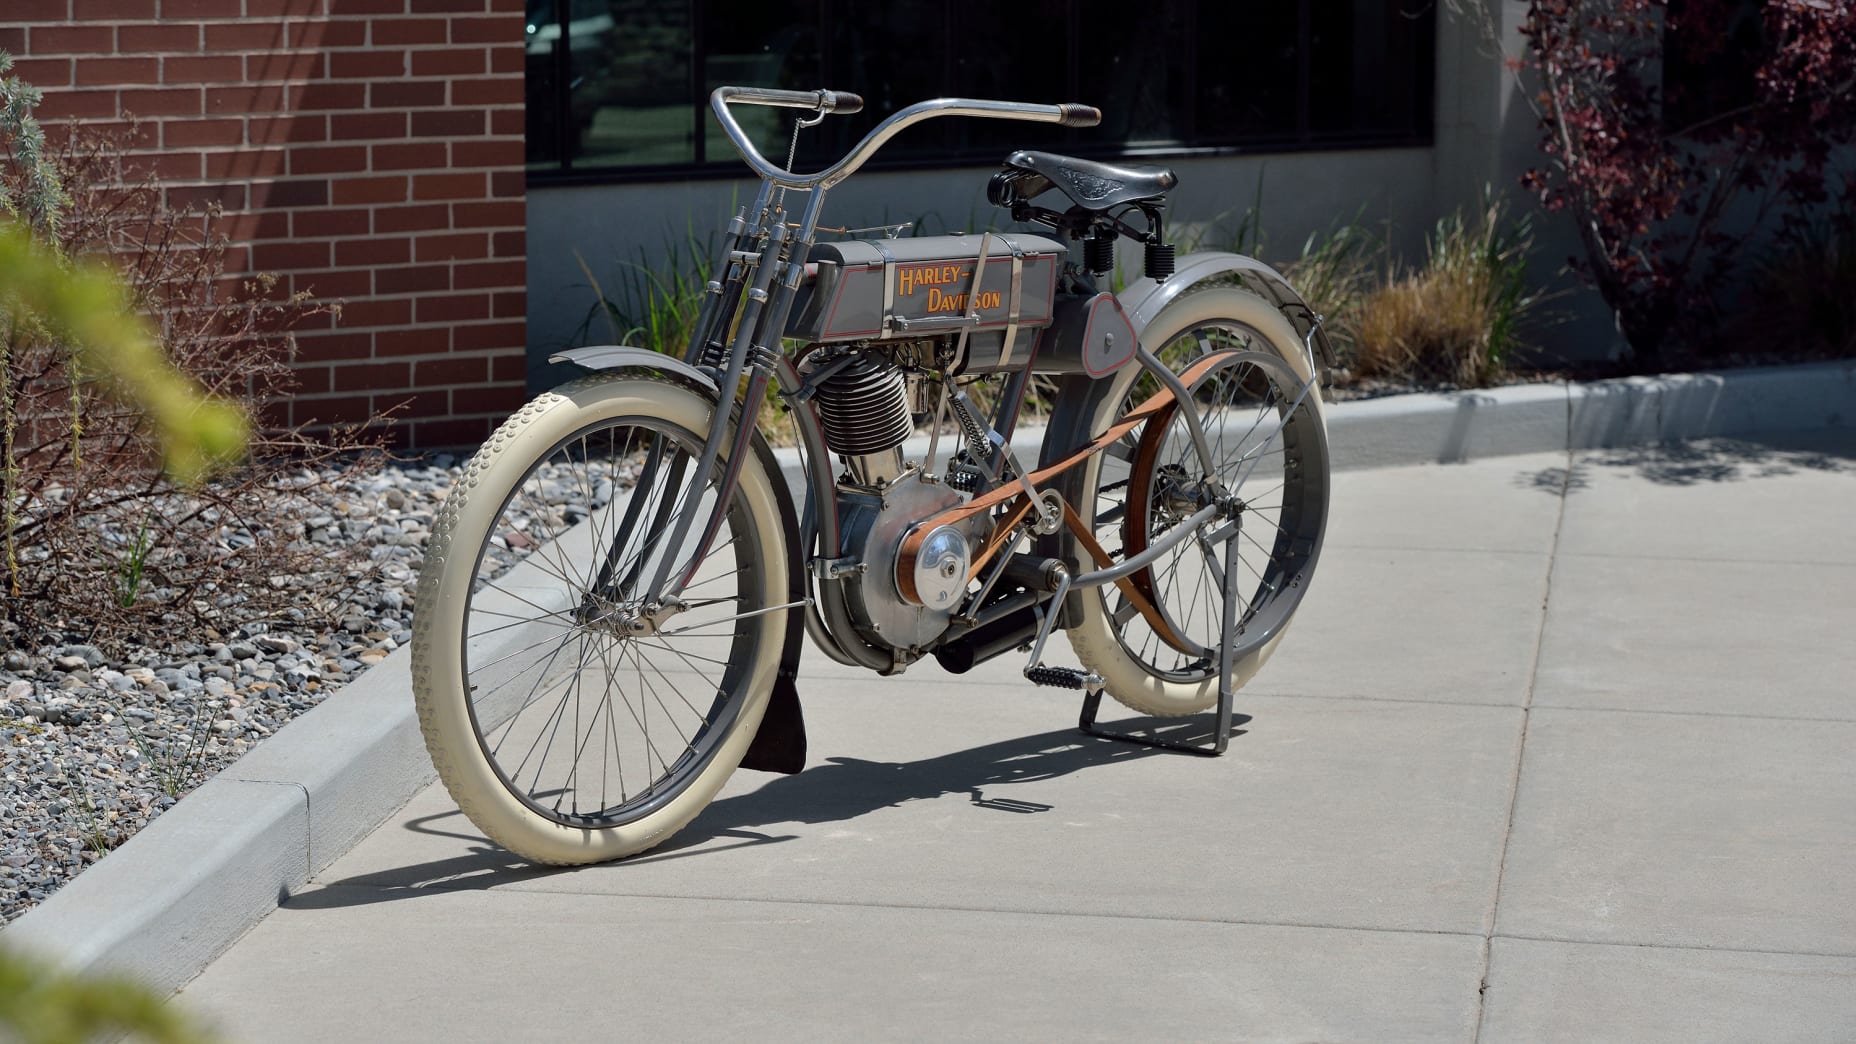 A restored 1908 Harley-Davidson motorcycle has sold for a record $935,000 at auction.